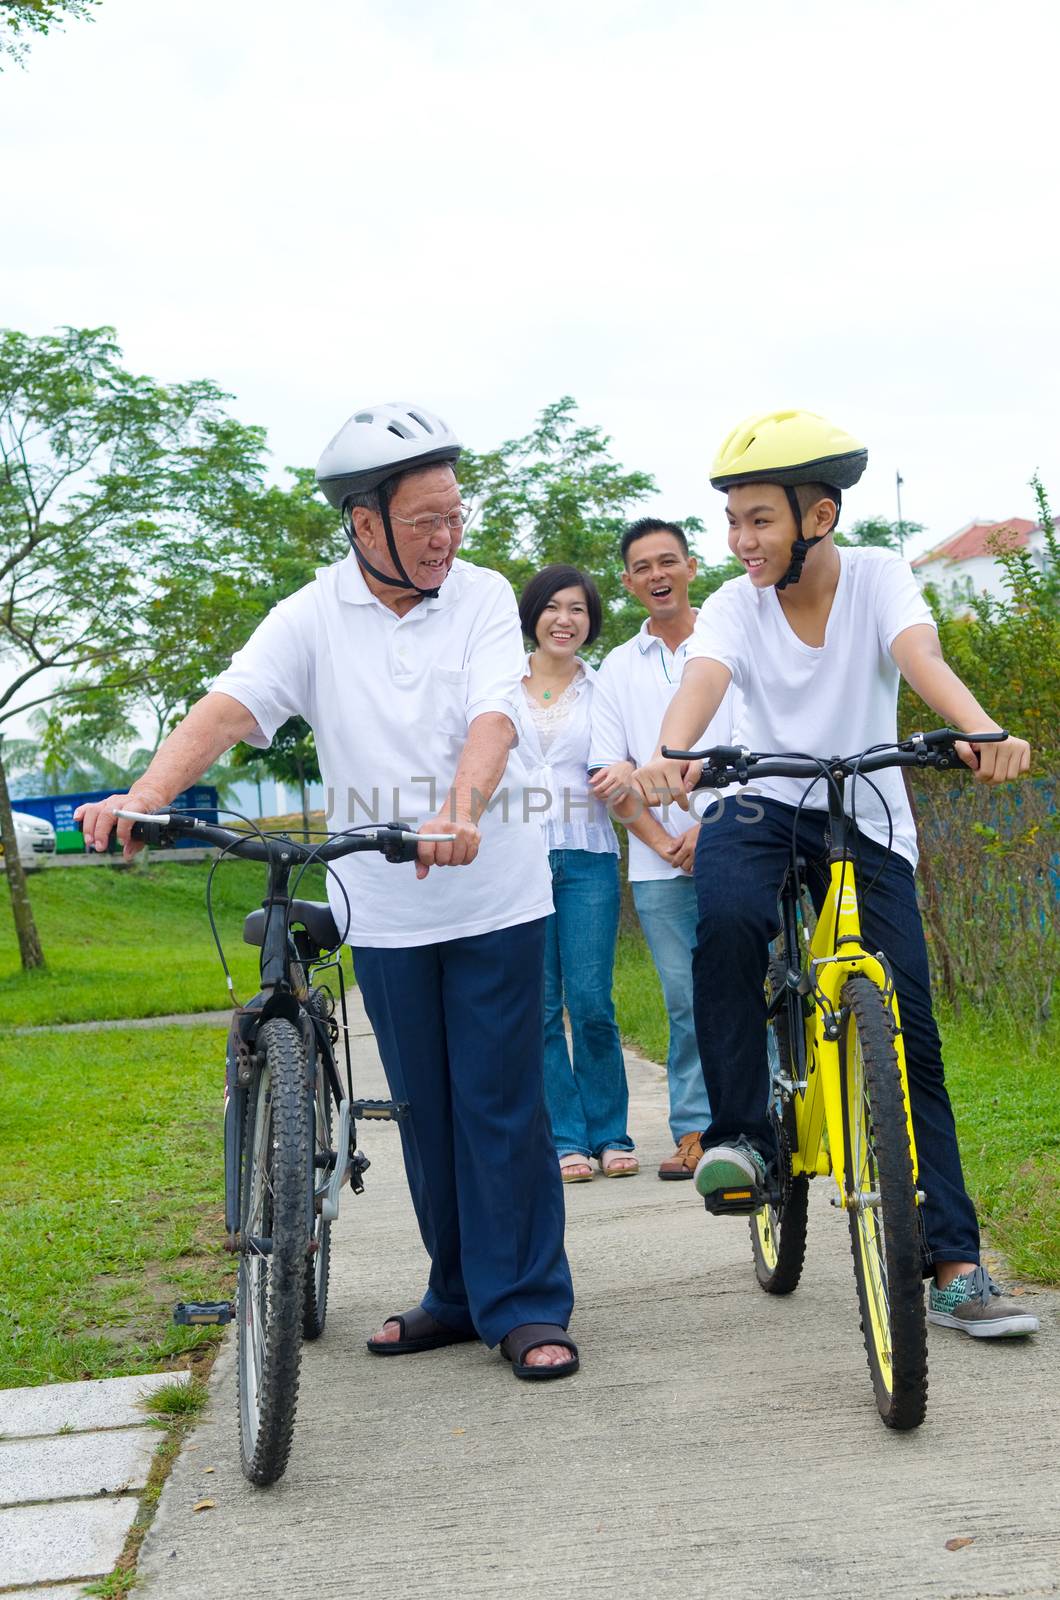 Asian  three generation Family On Cycle Ride In Countryside